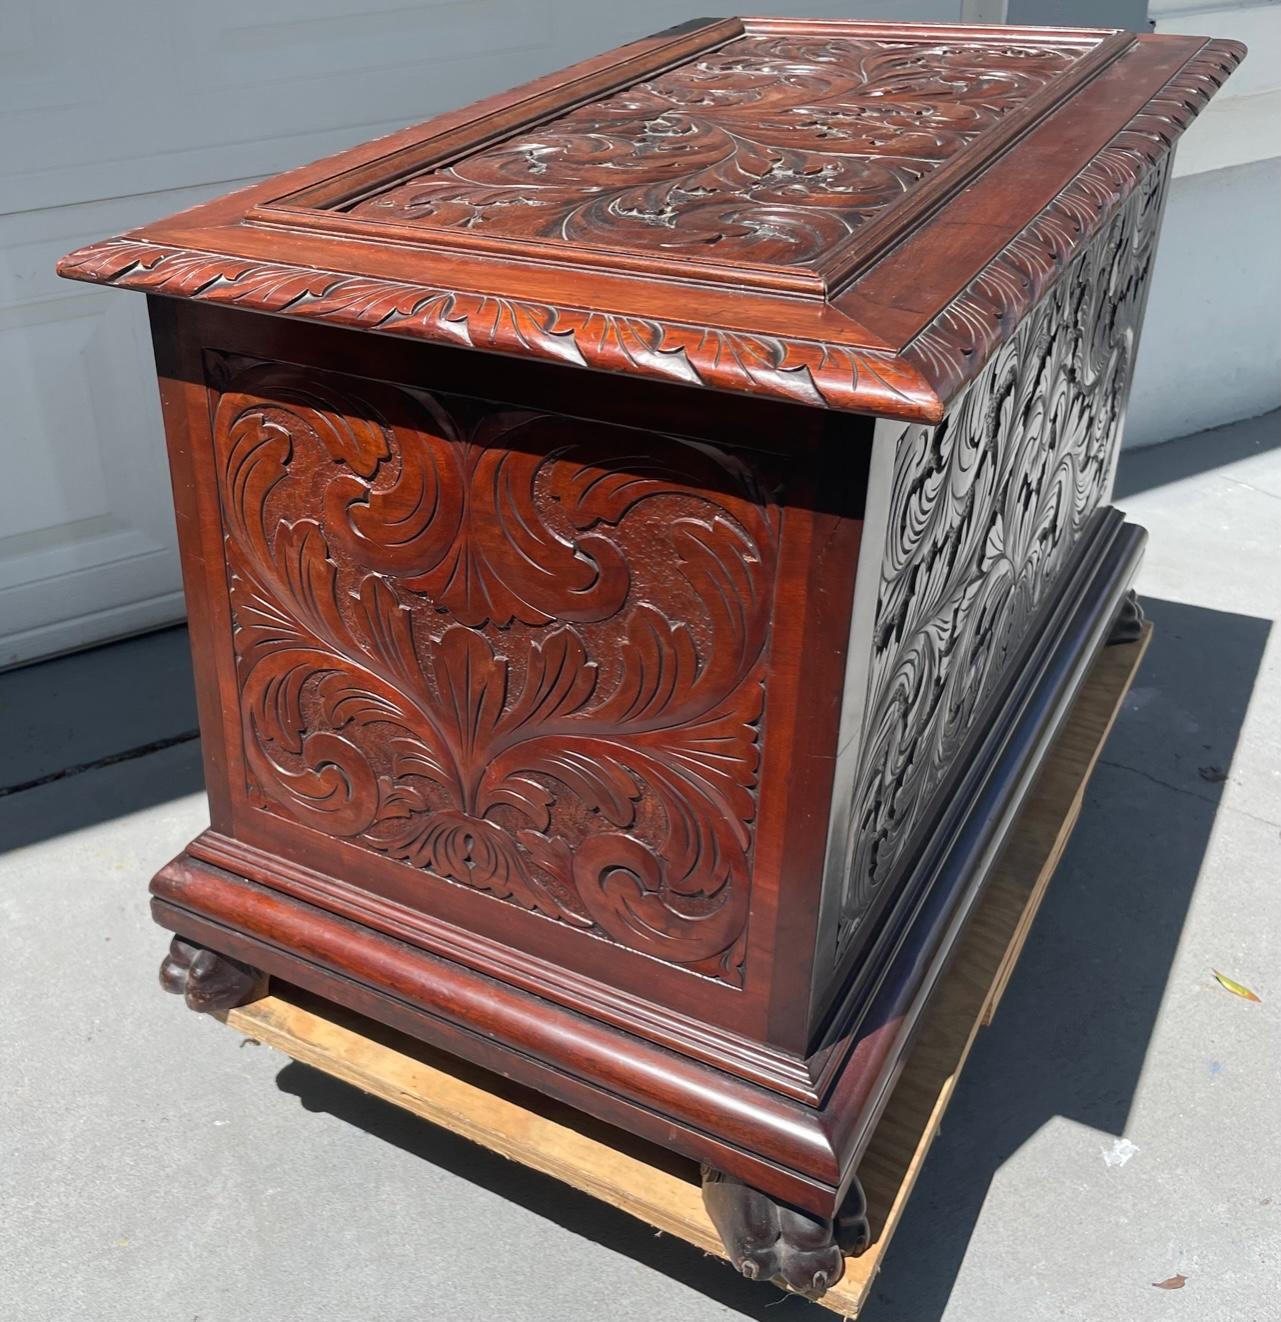 19th Century Baroque Revival Carved Wooden Blanket Chest For Sale 7